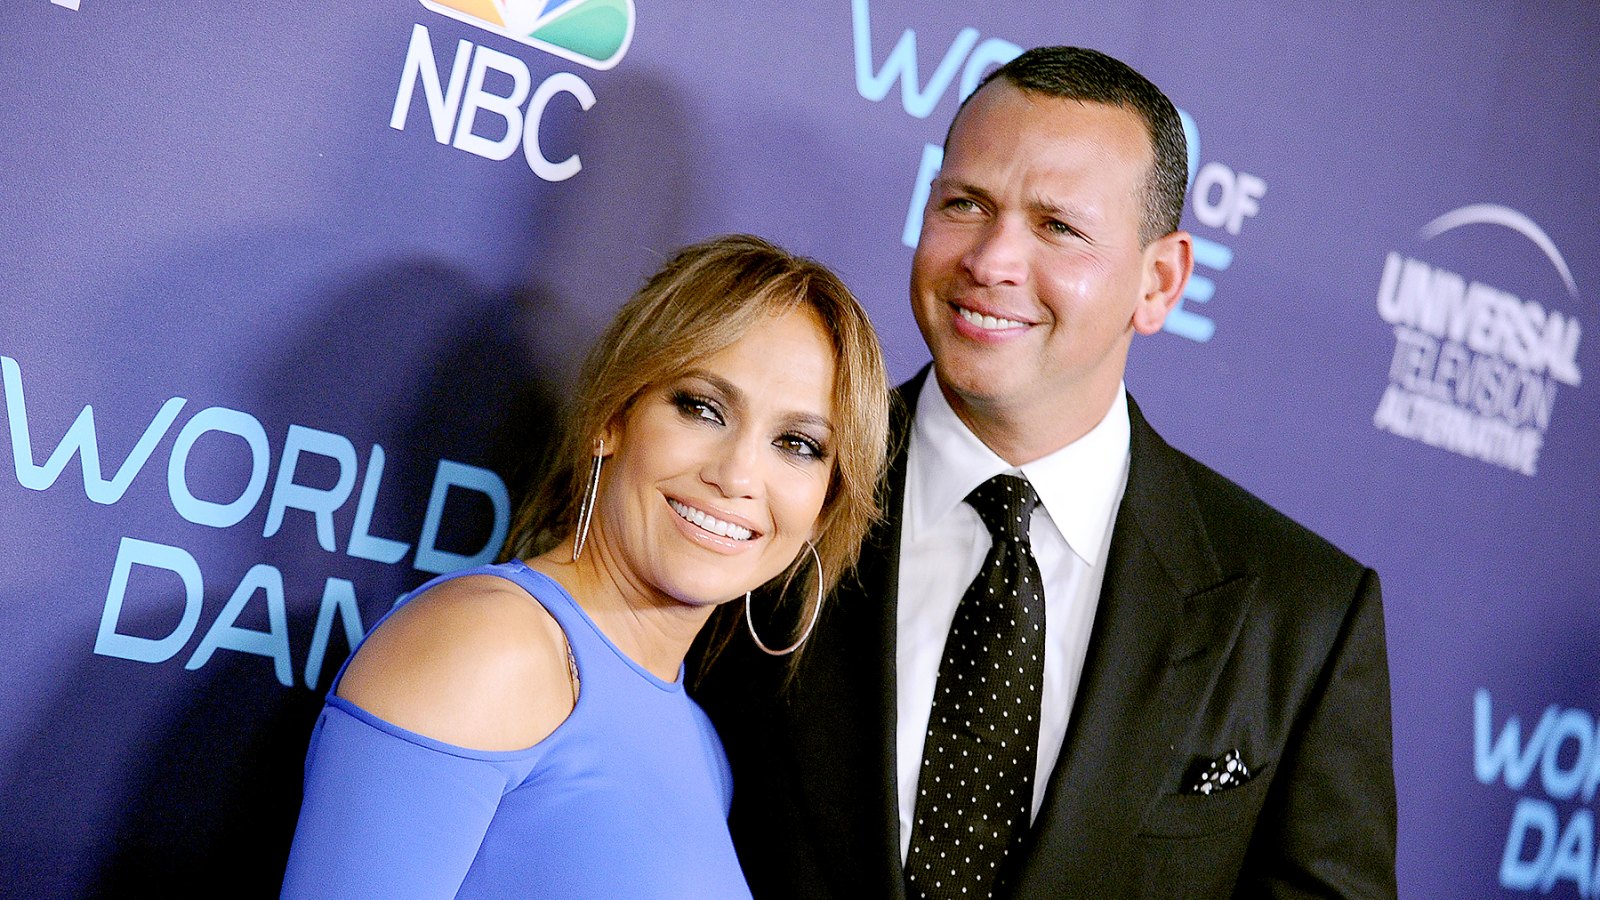 Jennifer Lopez and Alex Rodriguez attend NBC's "World of Dance" celebration at Delilah on September 19, 2017 in West Hollywood, California.